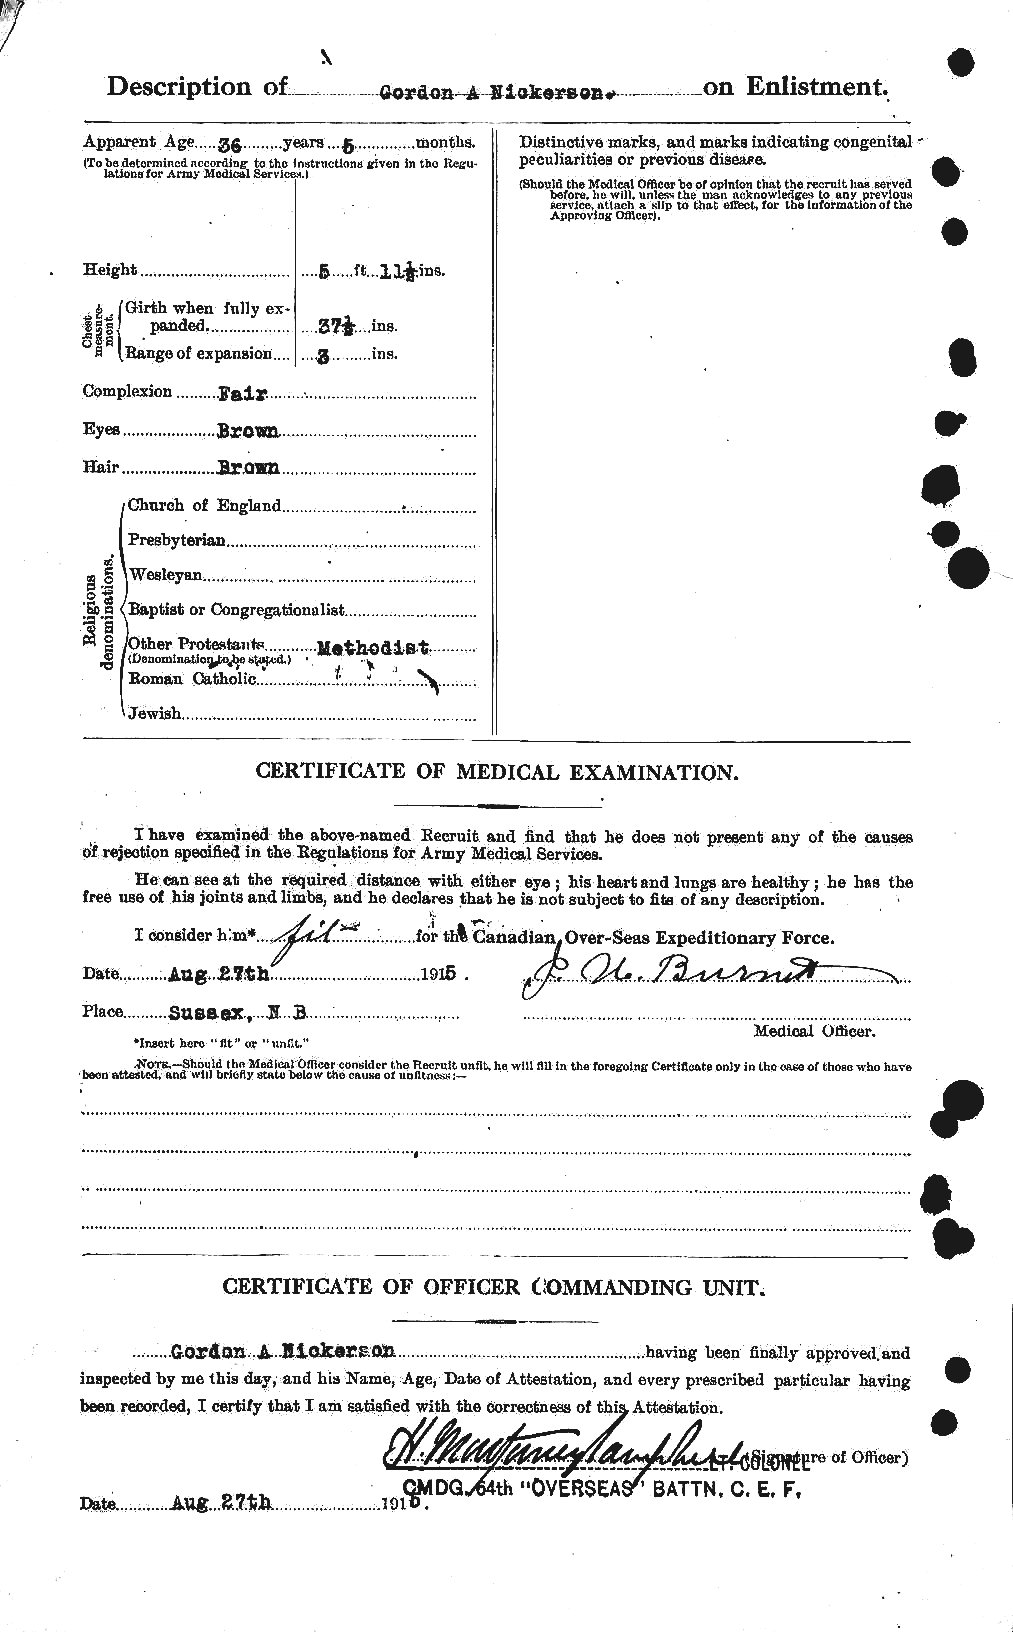 Personnel Records of the First World War - CEF 556577b